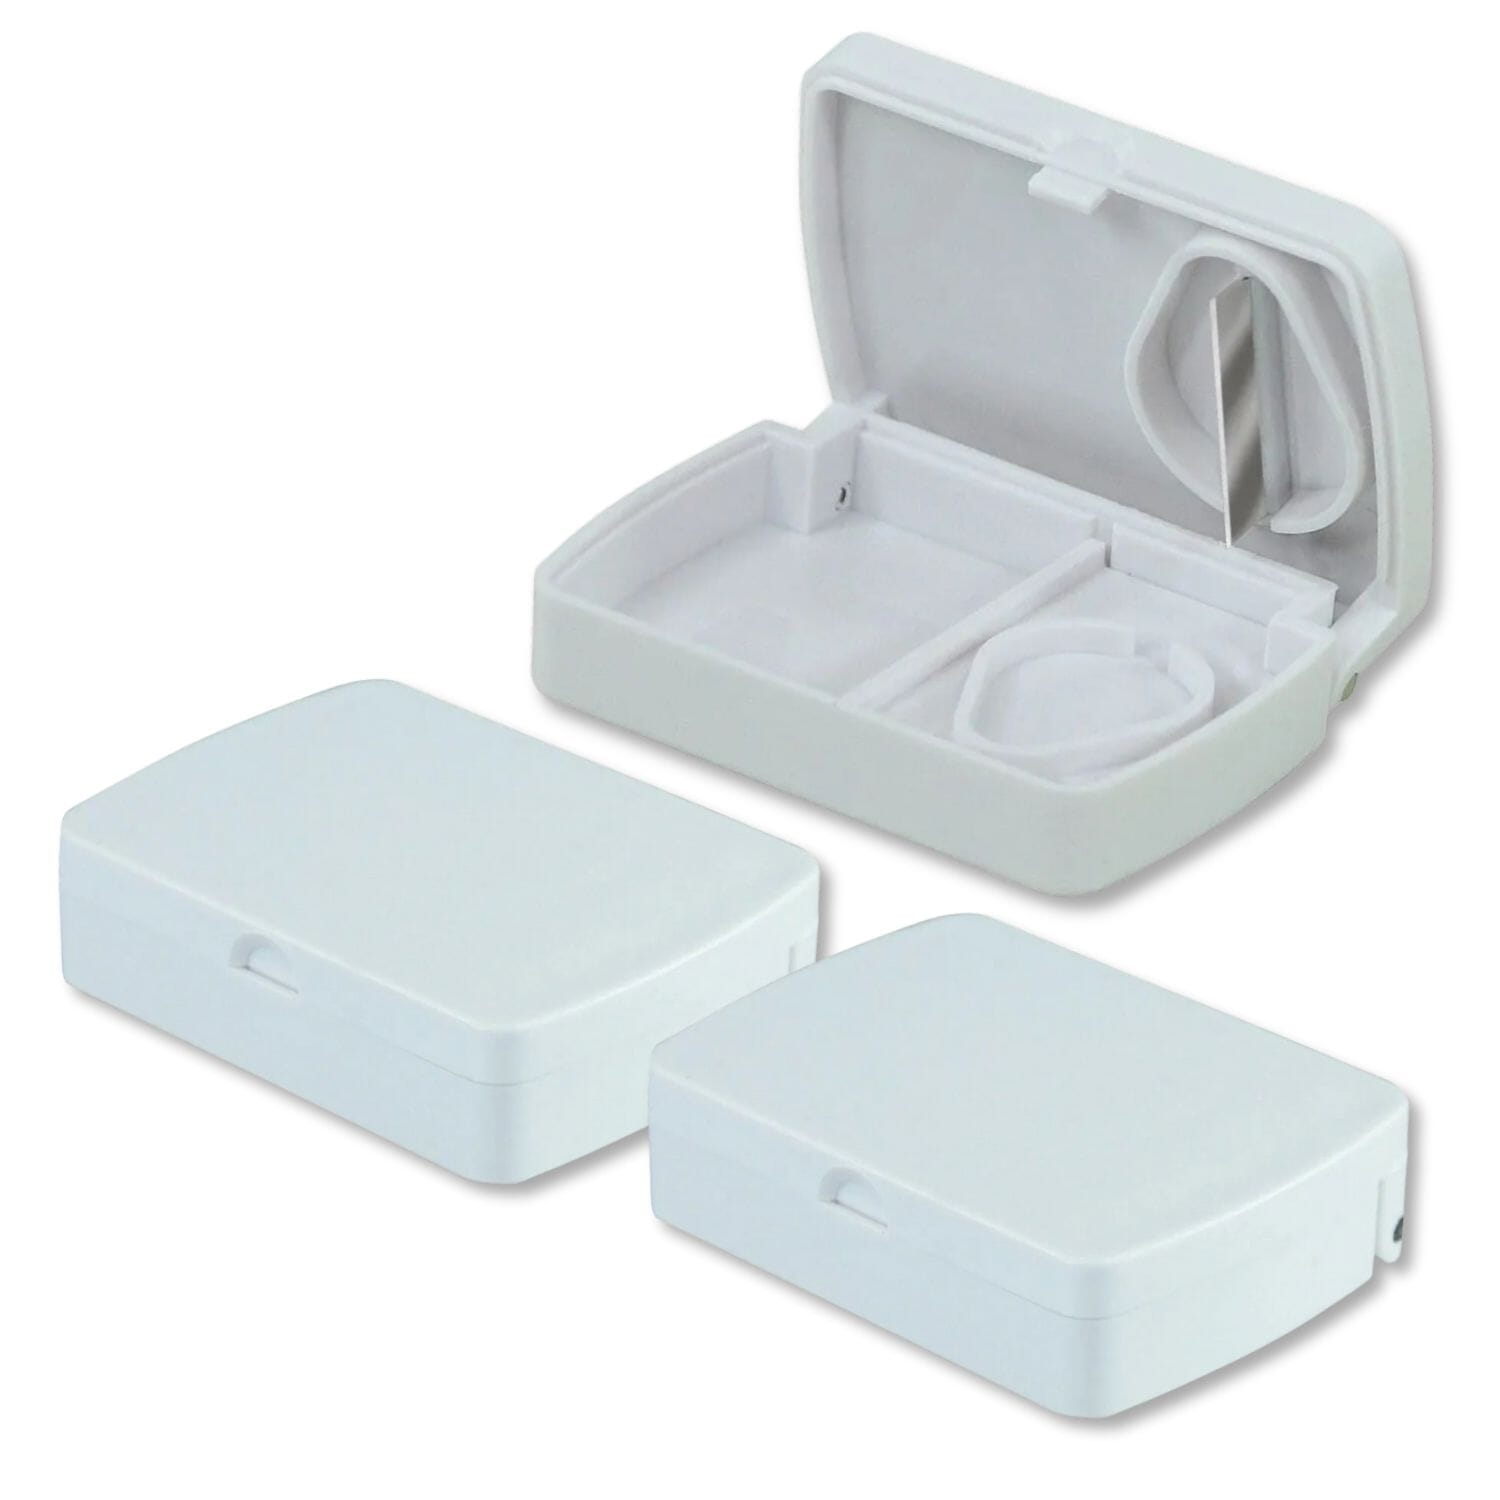 View Pill Storage Box with Tablet Splitter Pack of 3 information